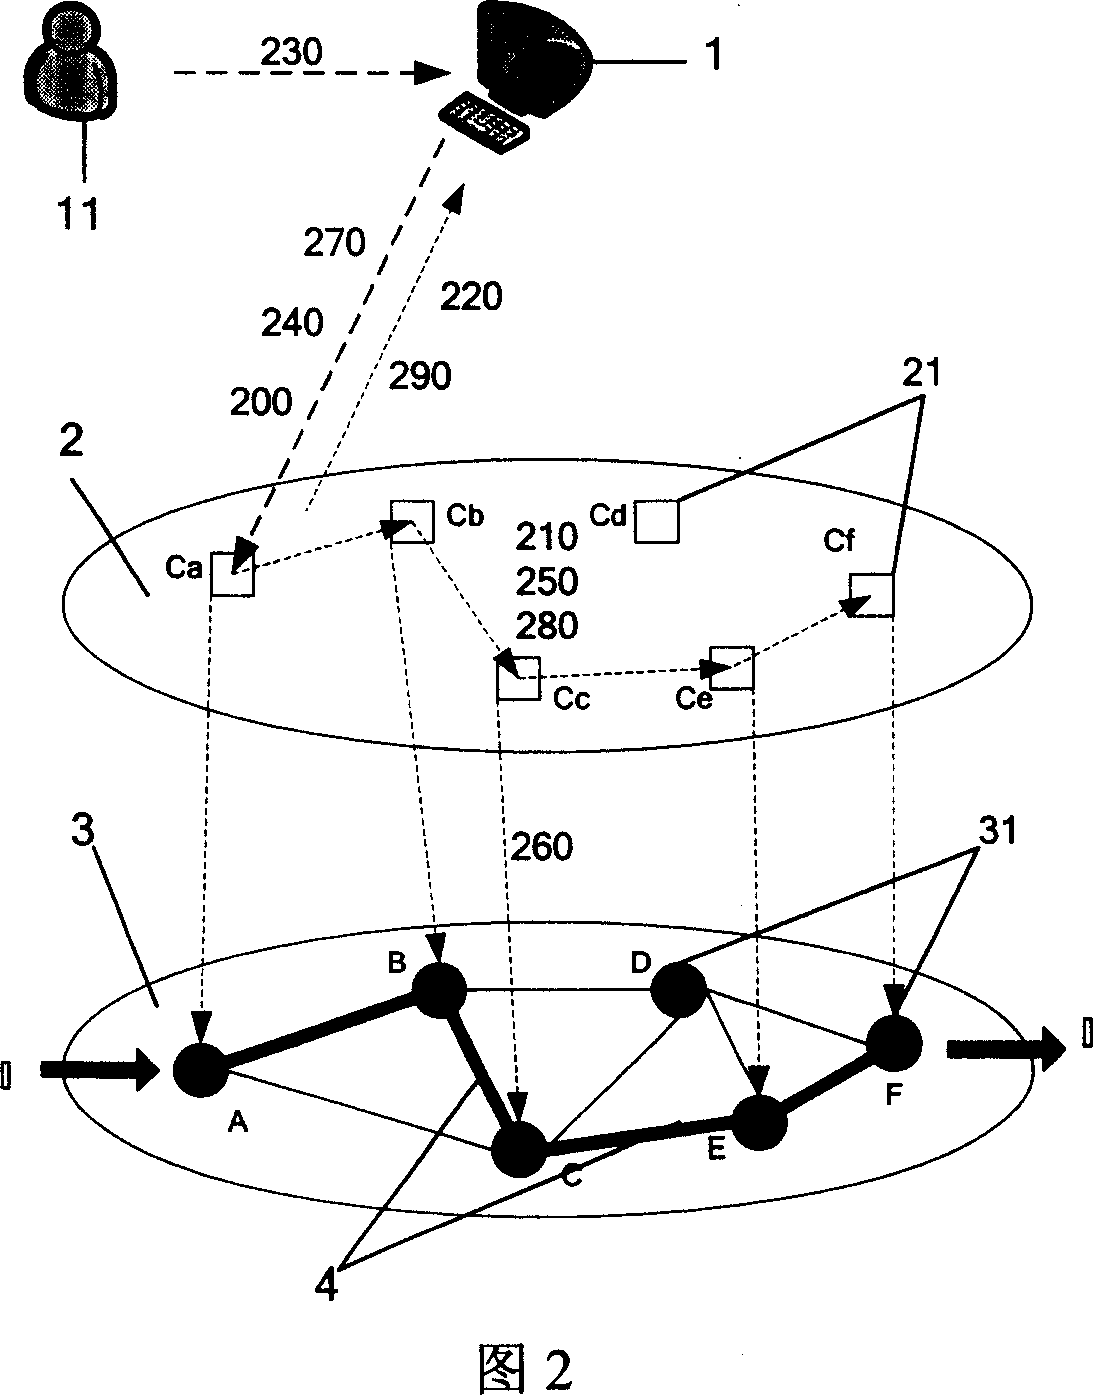 A method to establish soft permanent connection in intelligent optical network